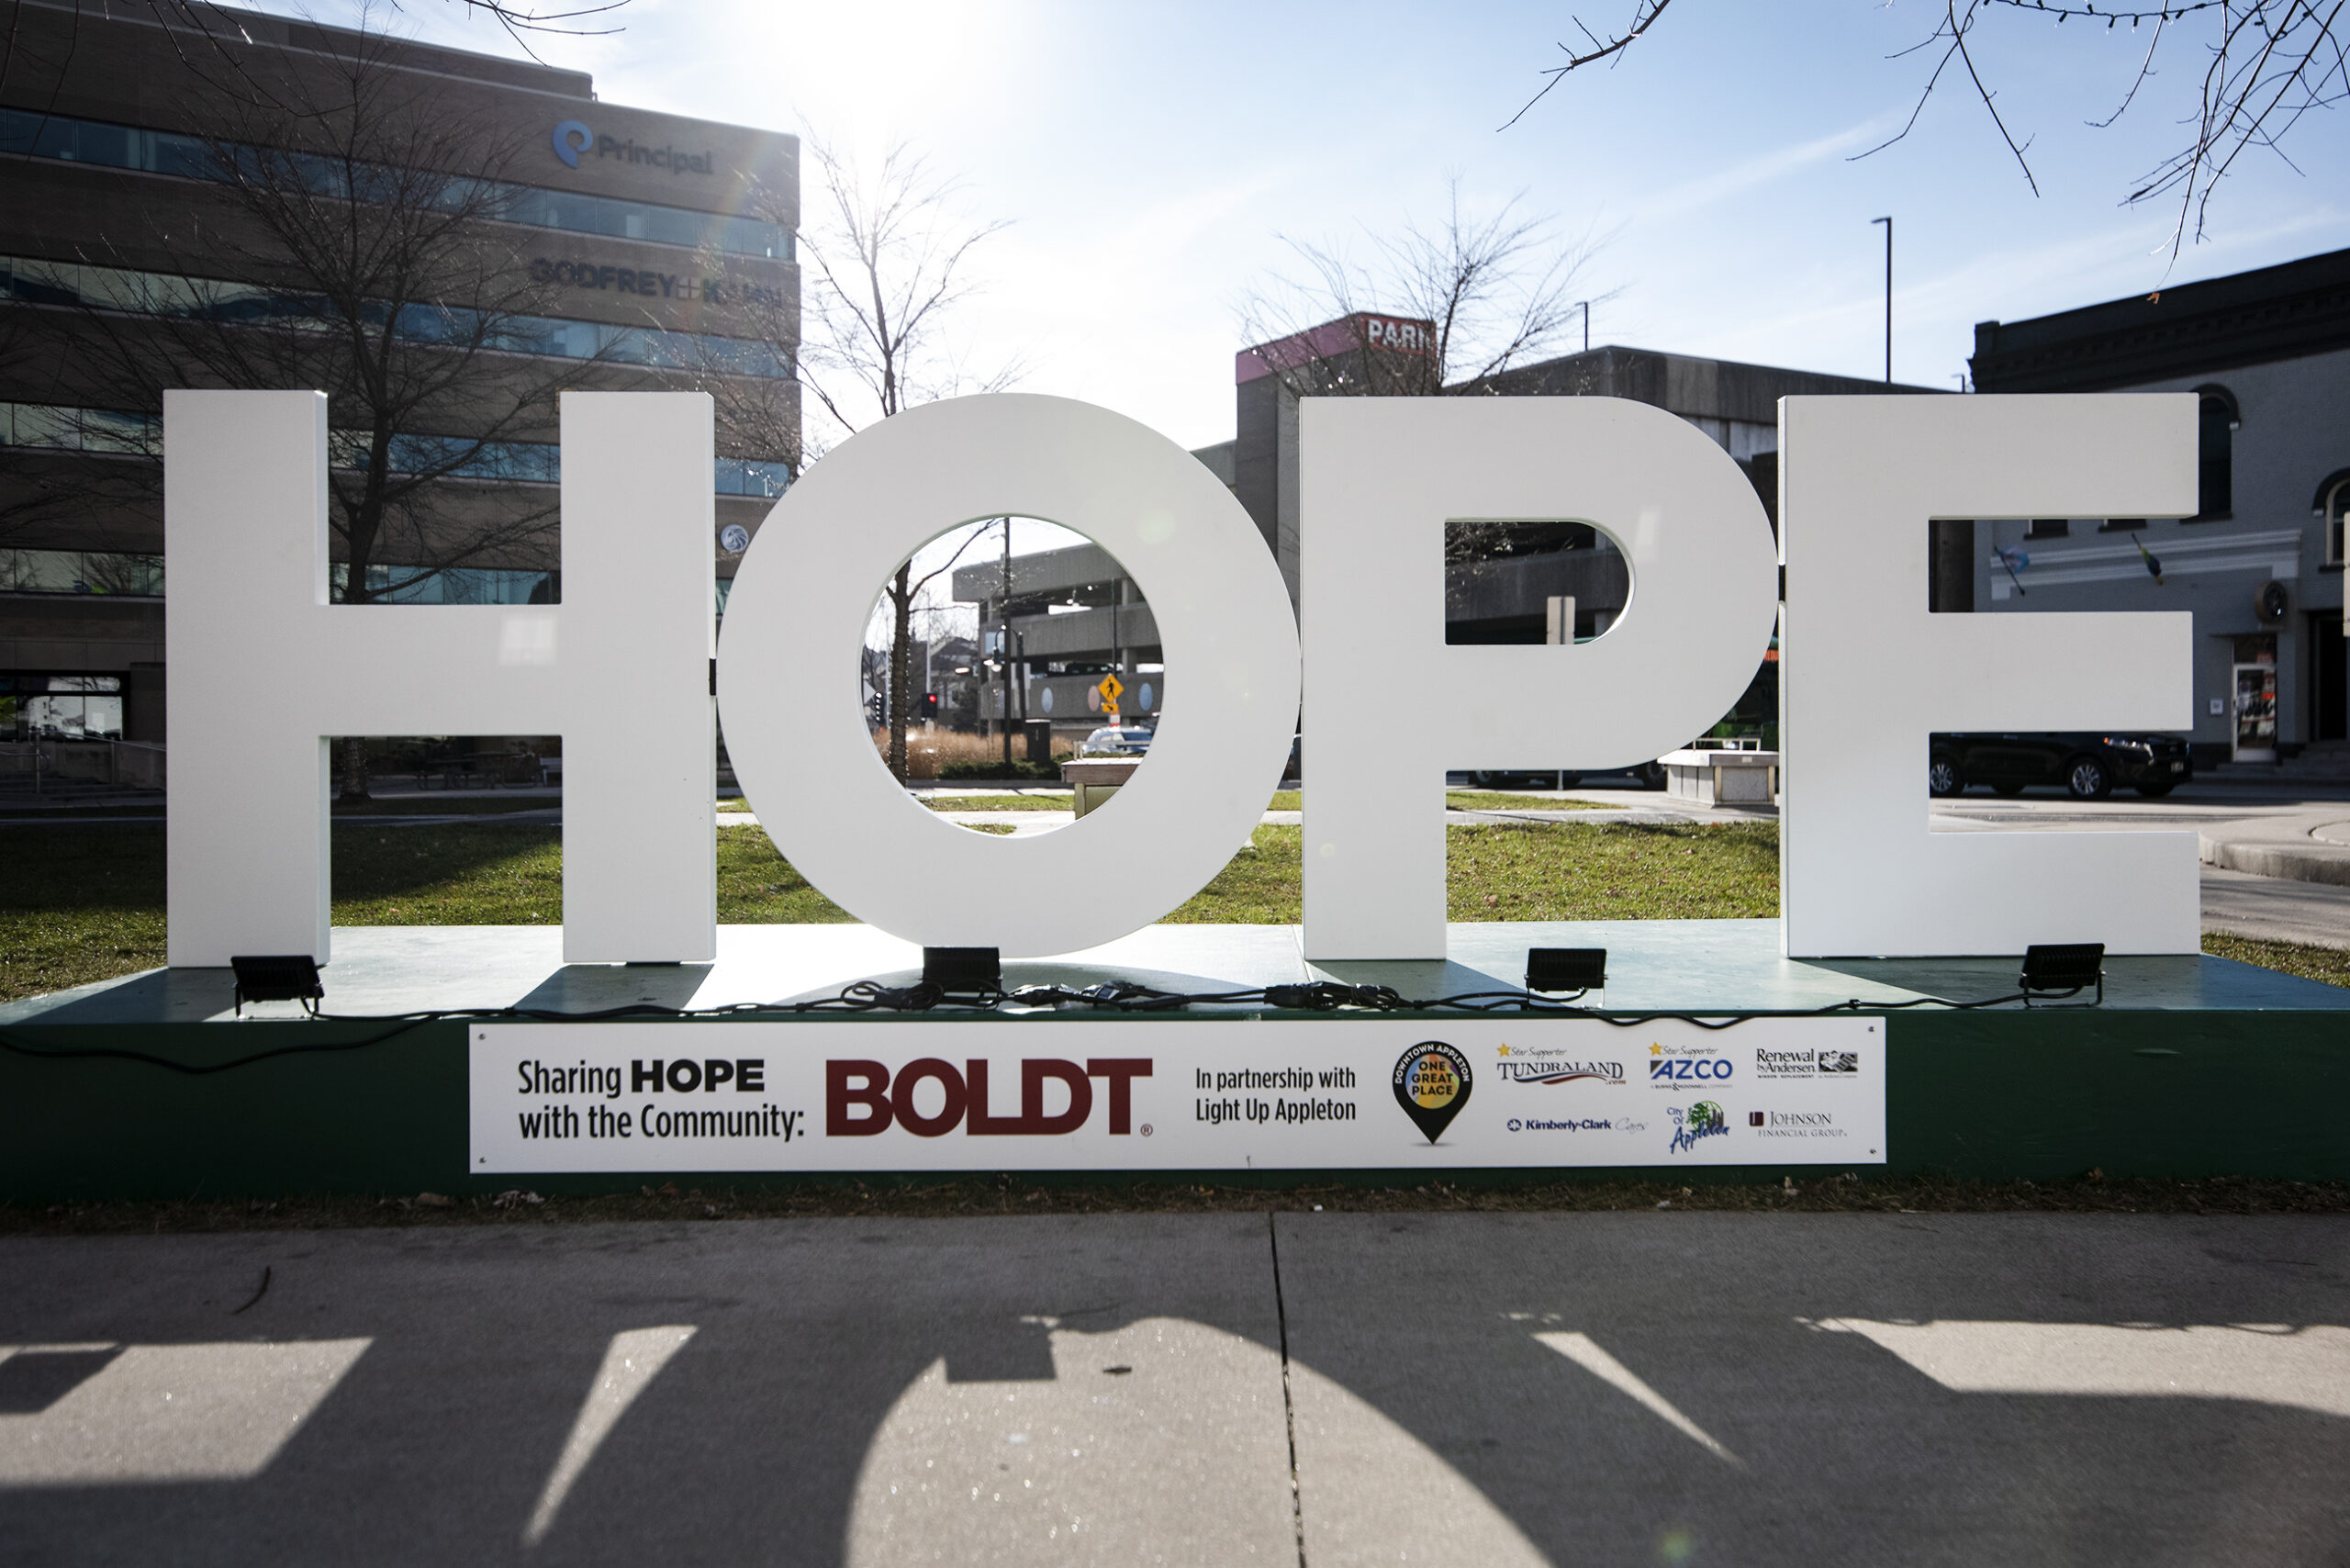 large white letters spell out the word "HOPE"